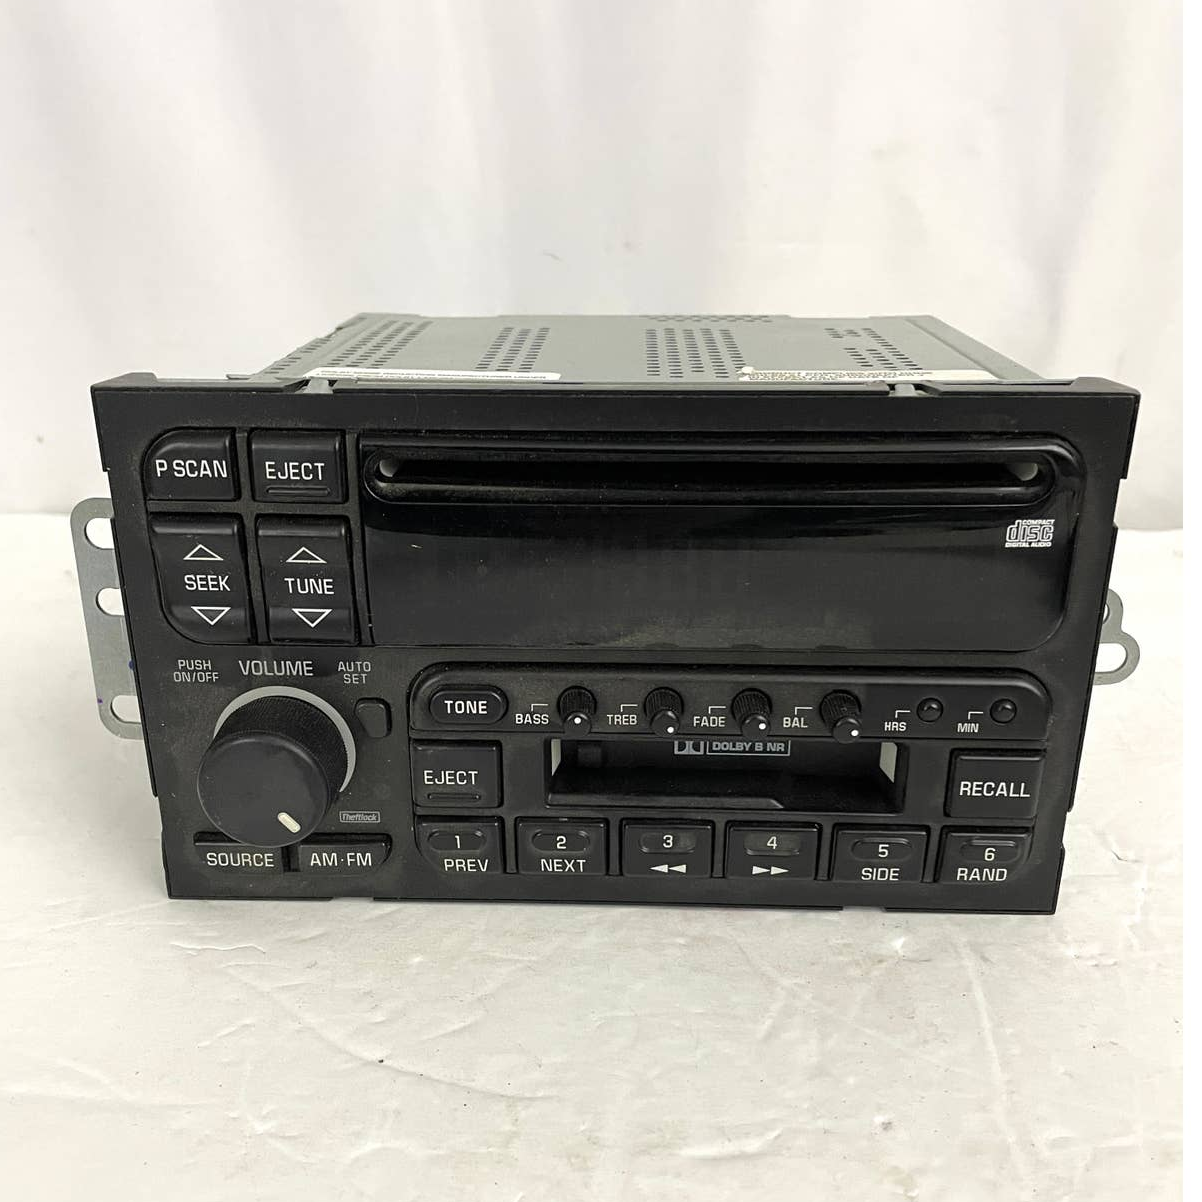 Primary image for Delco Cassette CD Player AM FM Radio Head Unit Part # 09375624 For 1996-2005 